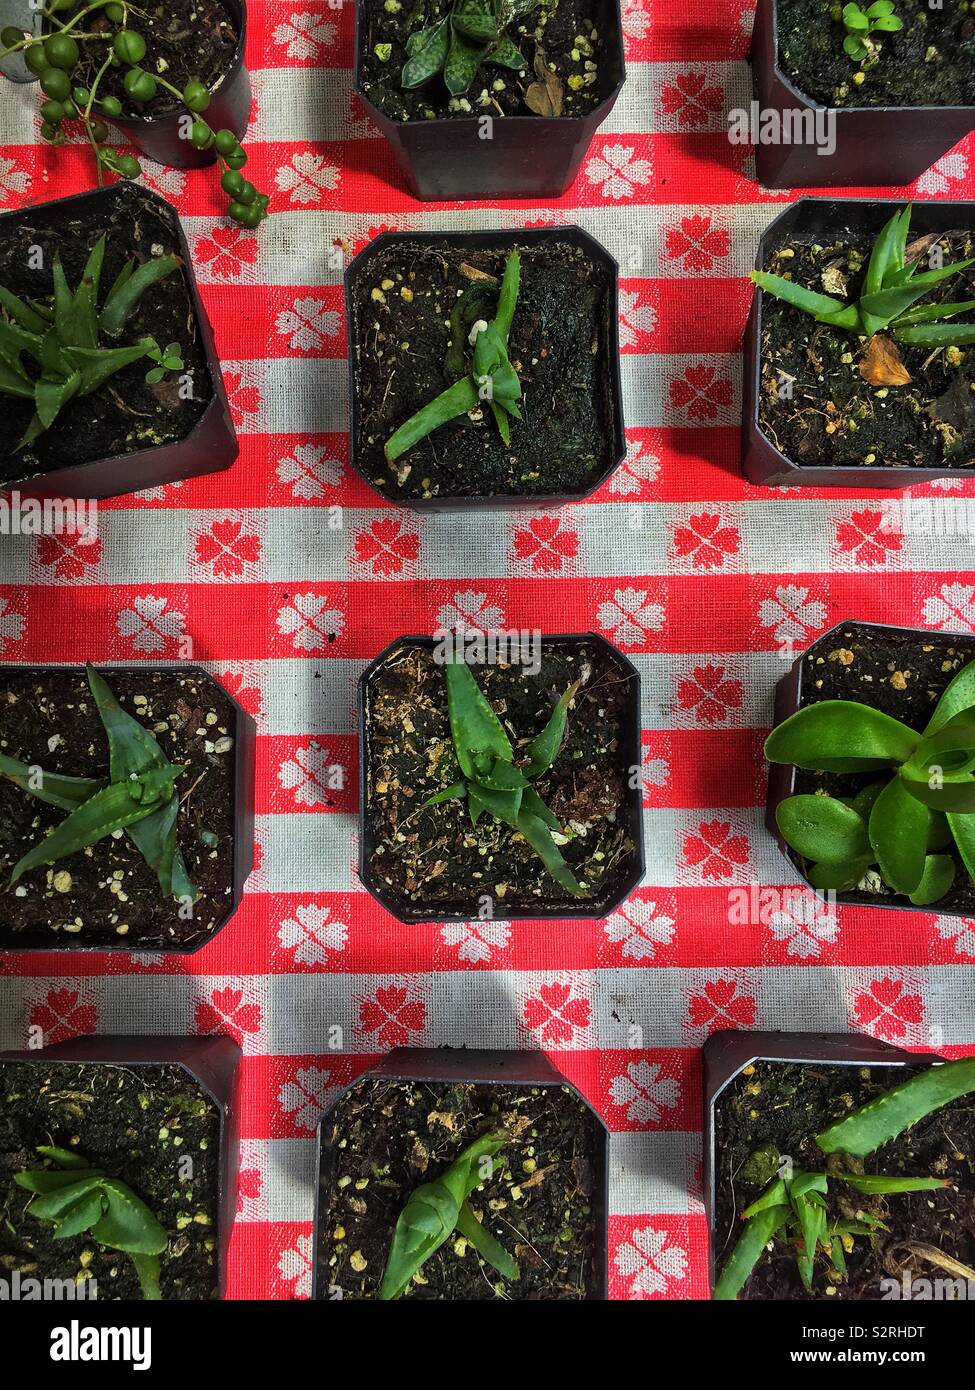 Small aloe Vera plants in small plastic containers on display. Stock Photo